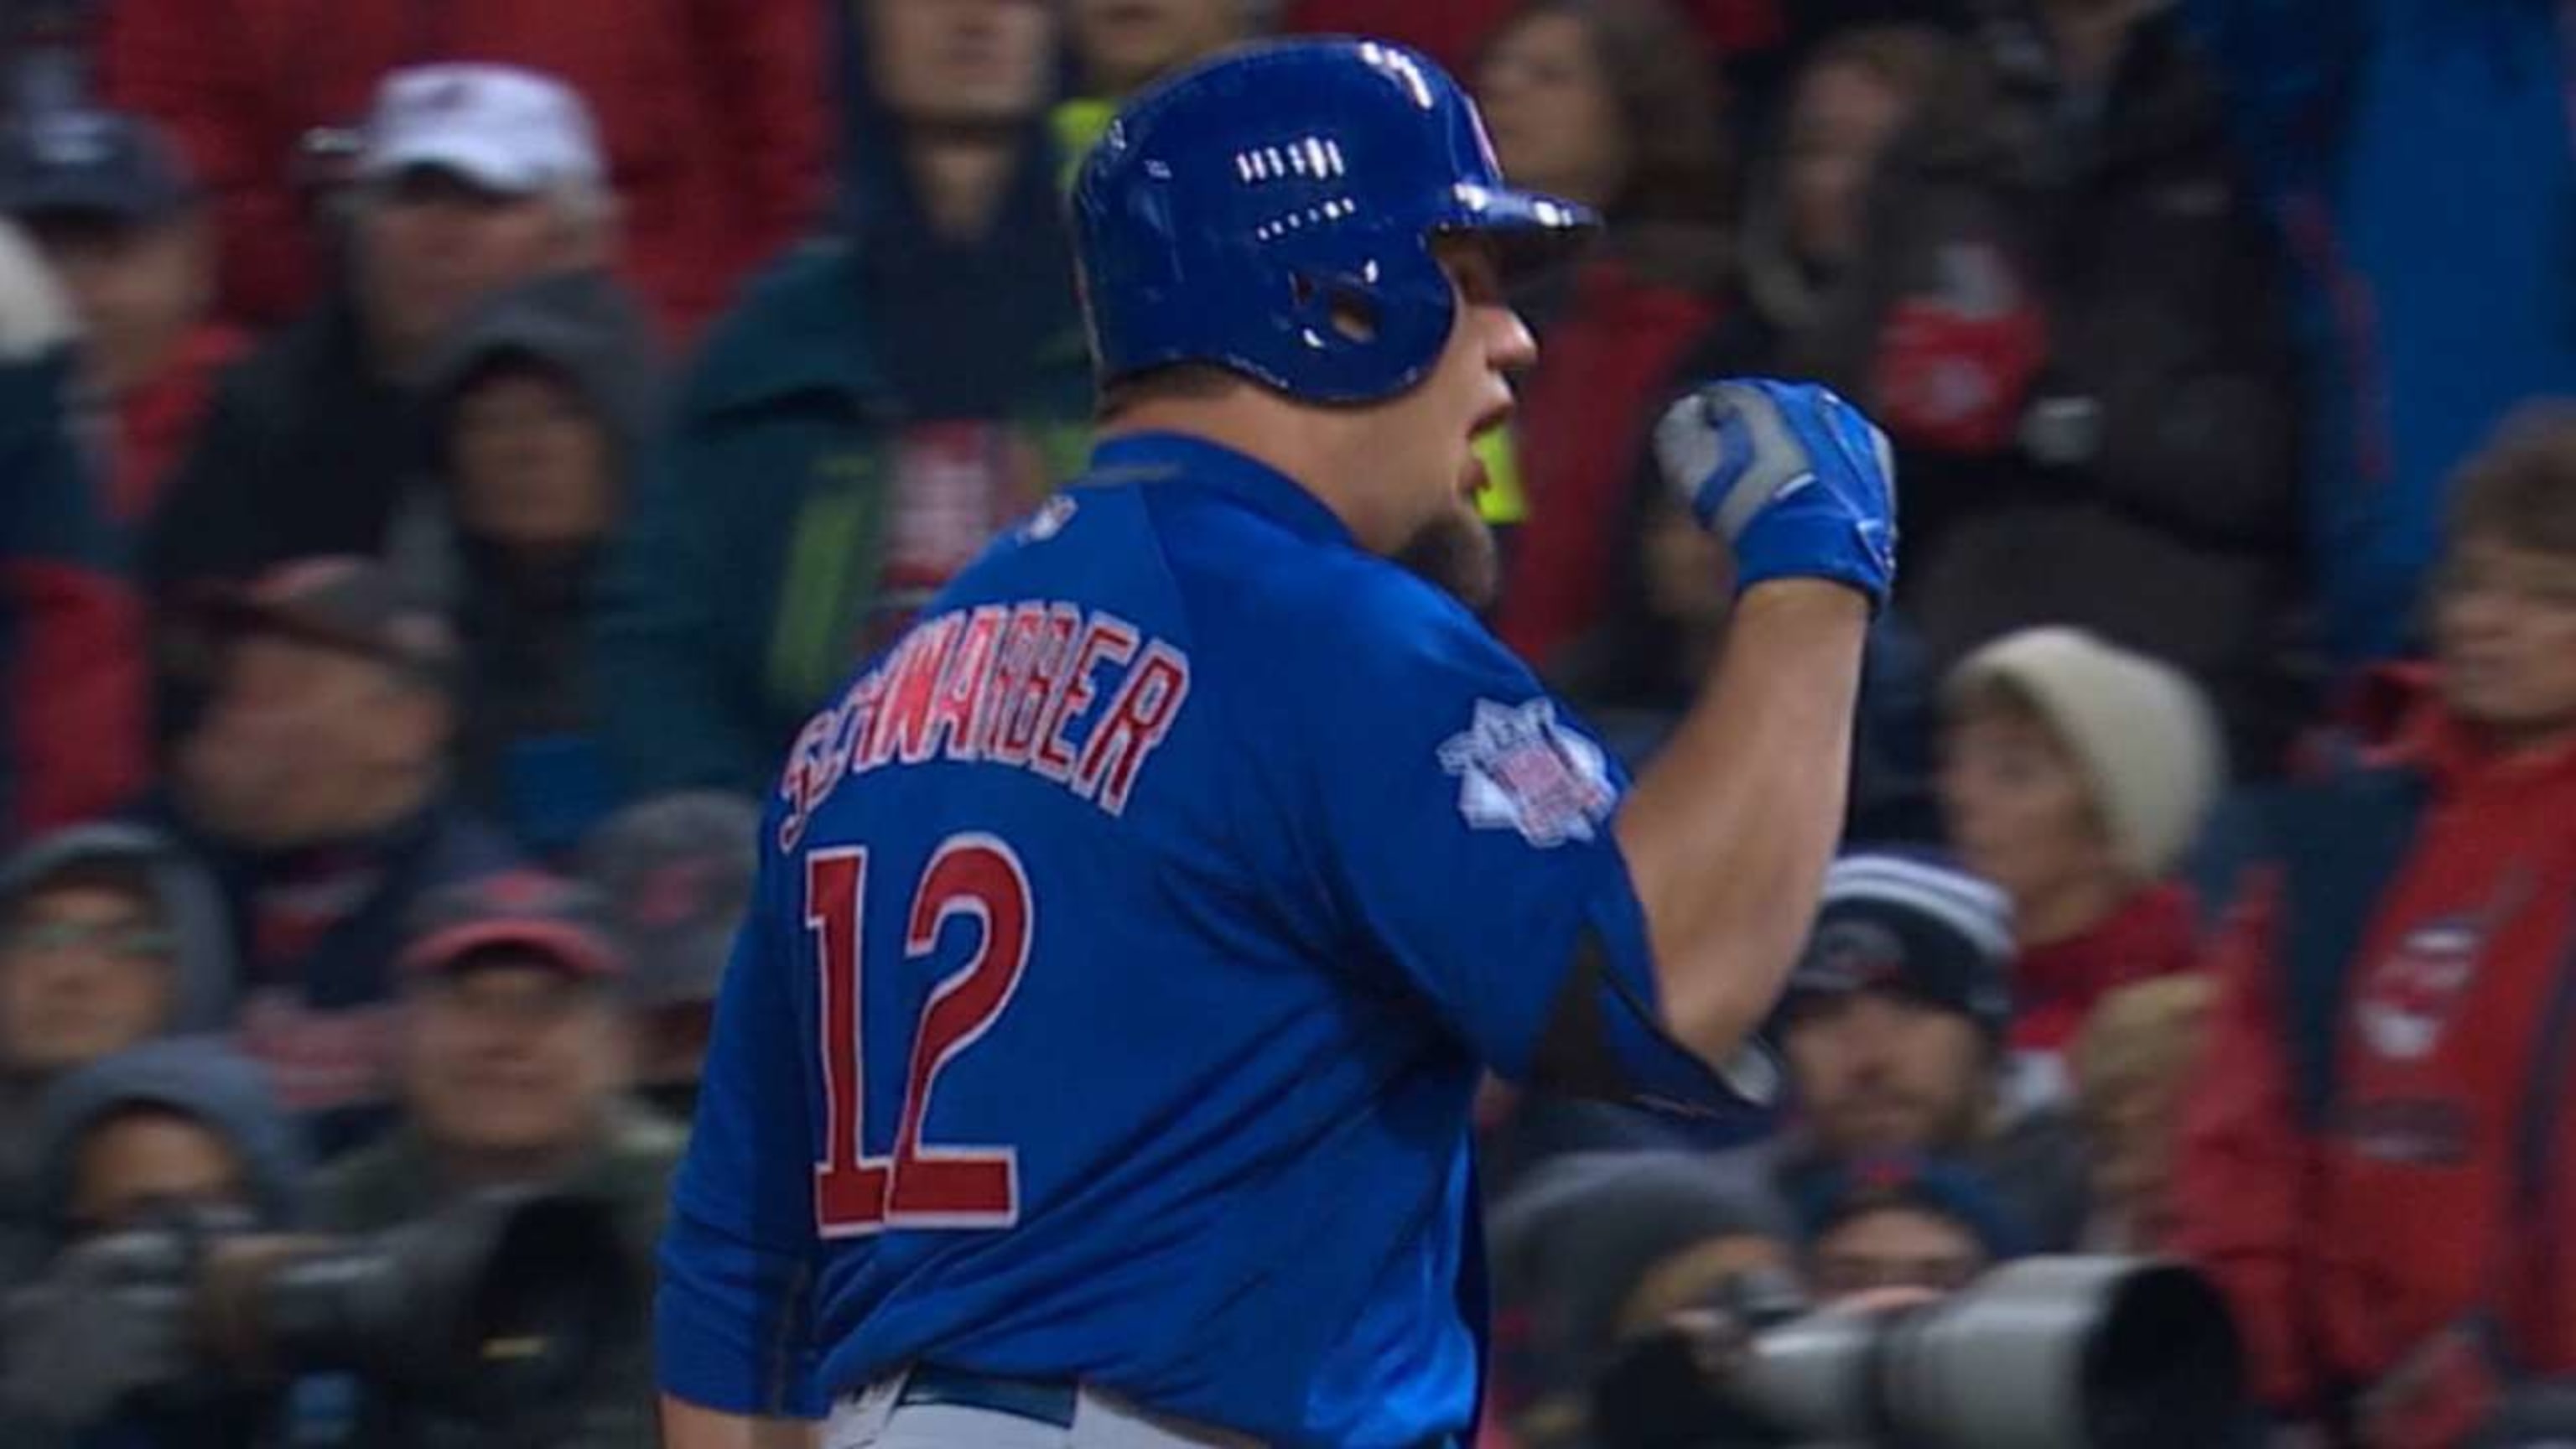 Kyle Schwarber has not been medically cleared to play the outfield